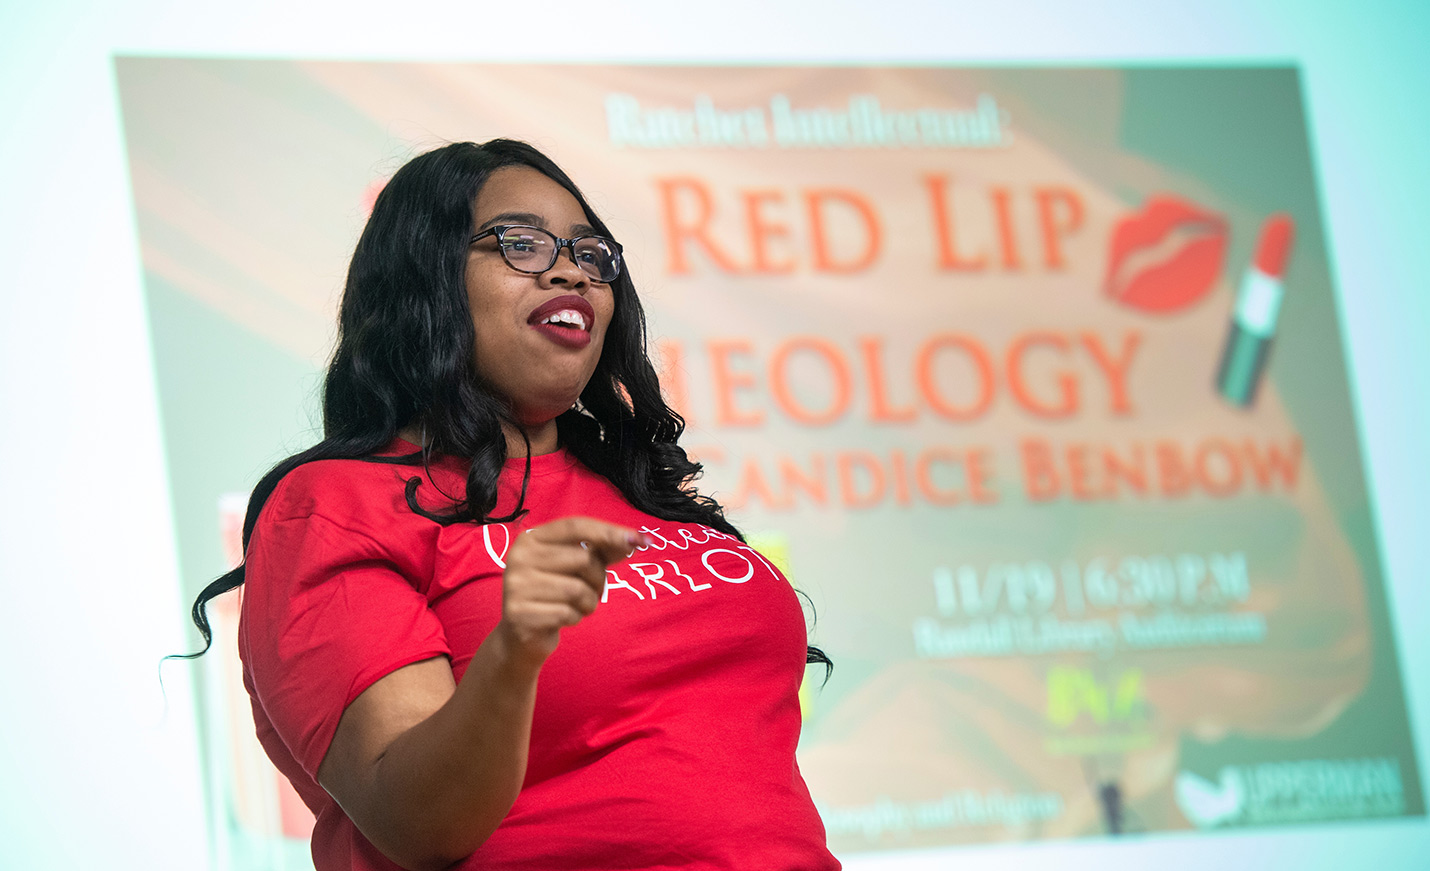 A woman in a red T-shirt with lettering stands in front of a screen with Red Lip Theology projected onto it